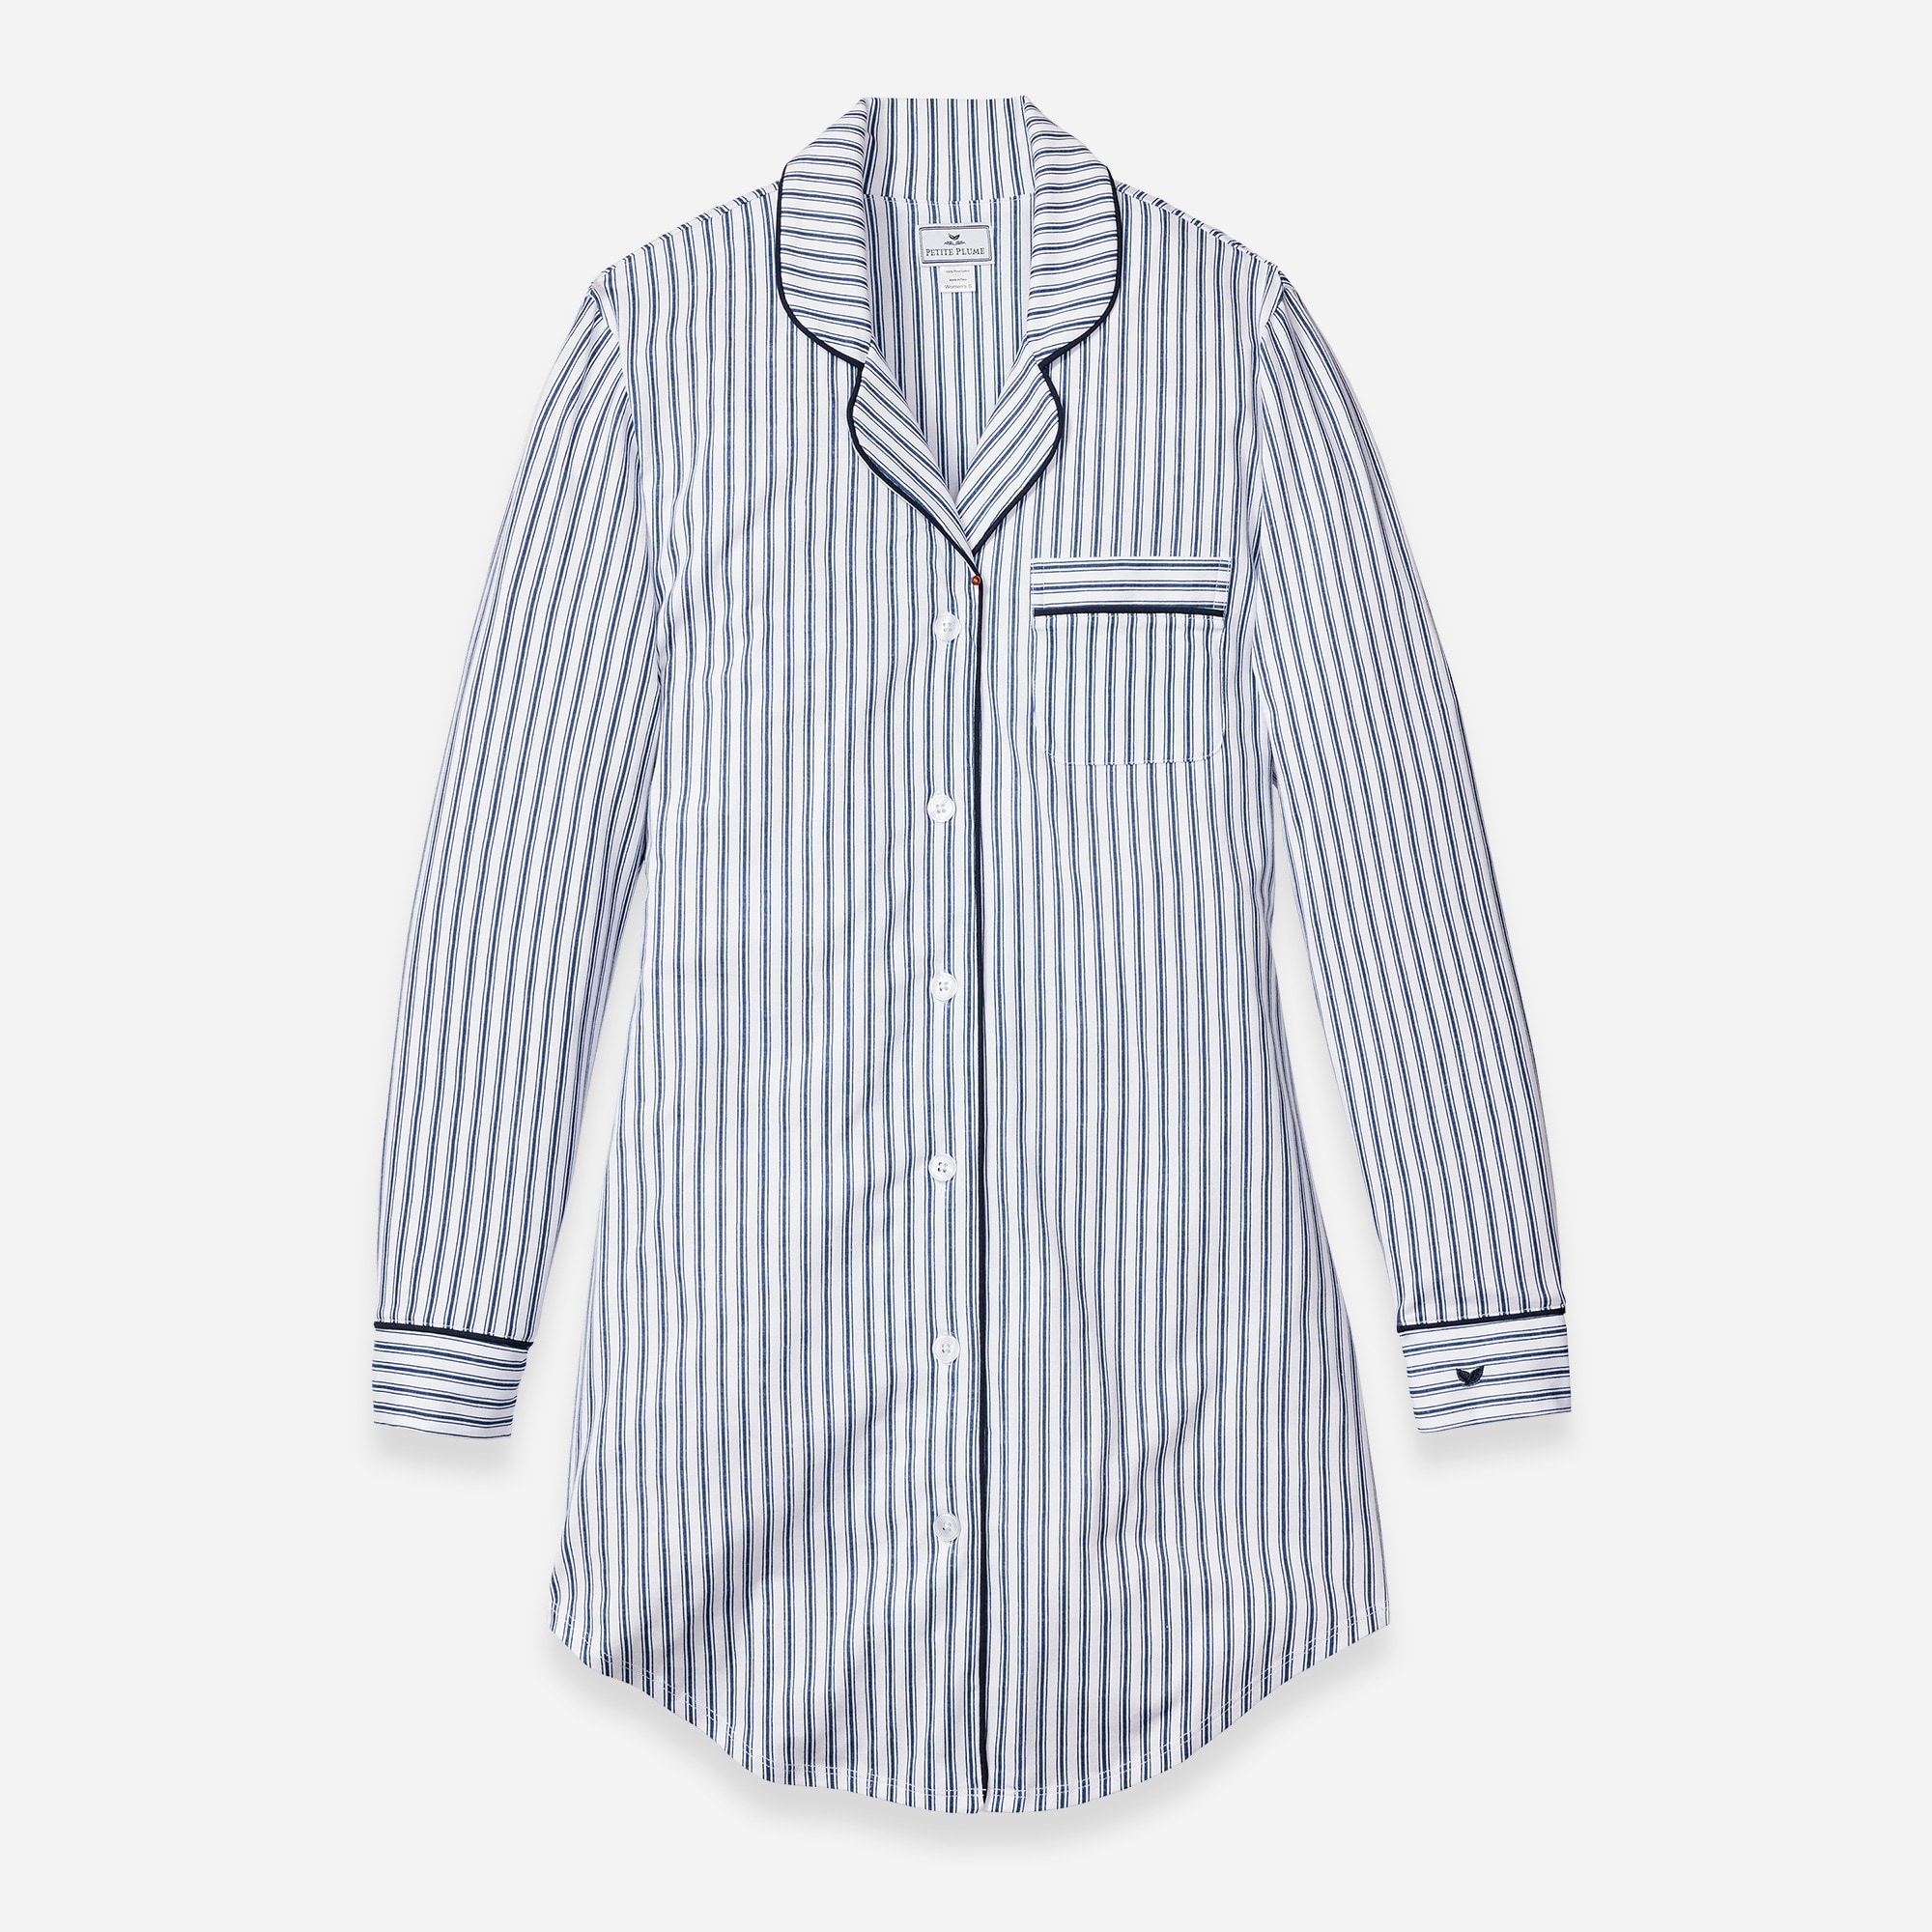  Petite Plume&trade; women's nightshirt in luxe Pima cotton with french ticking